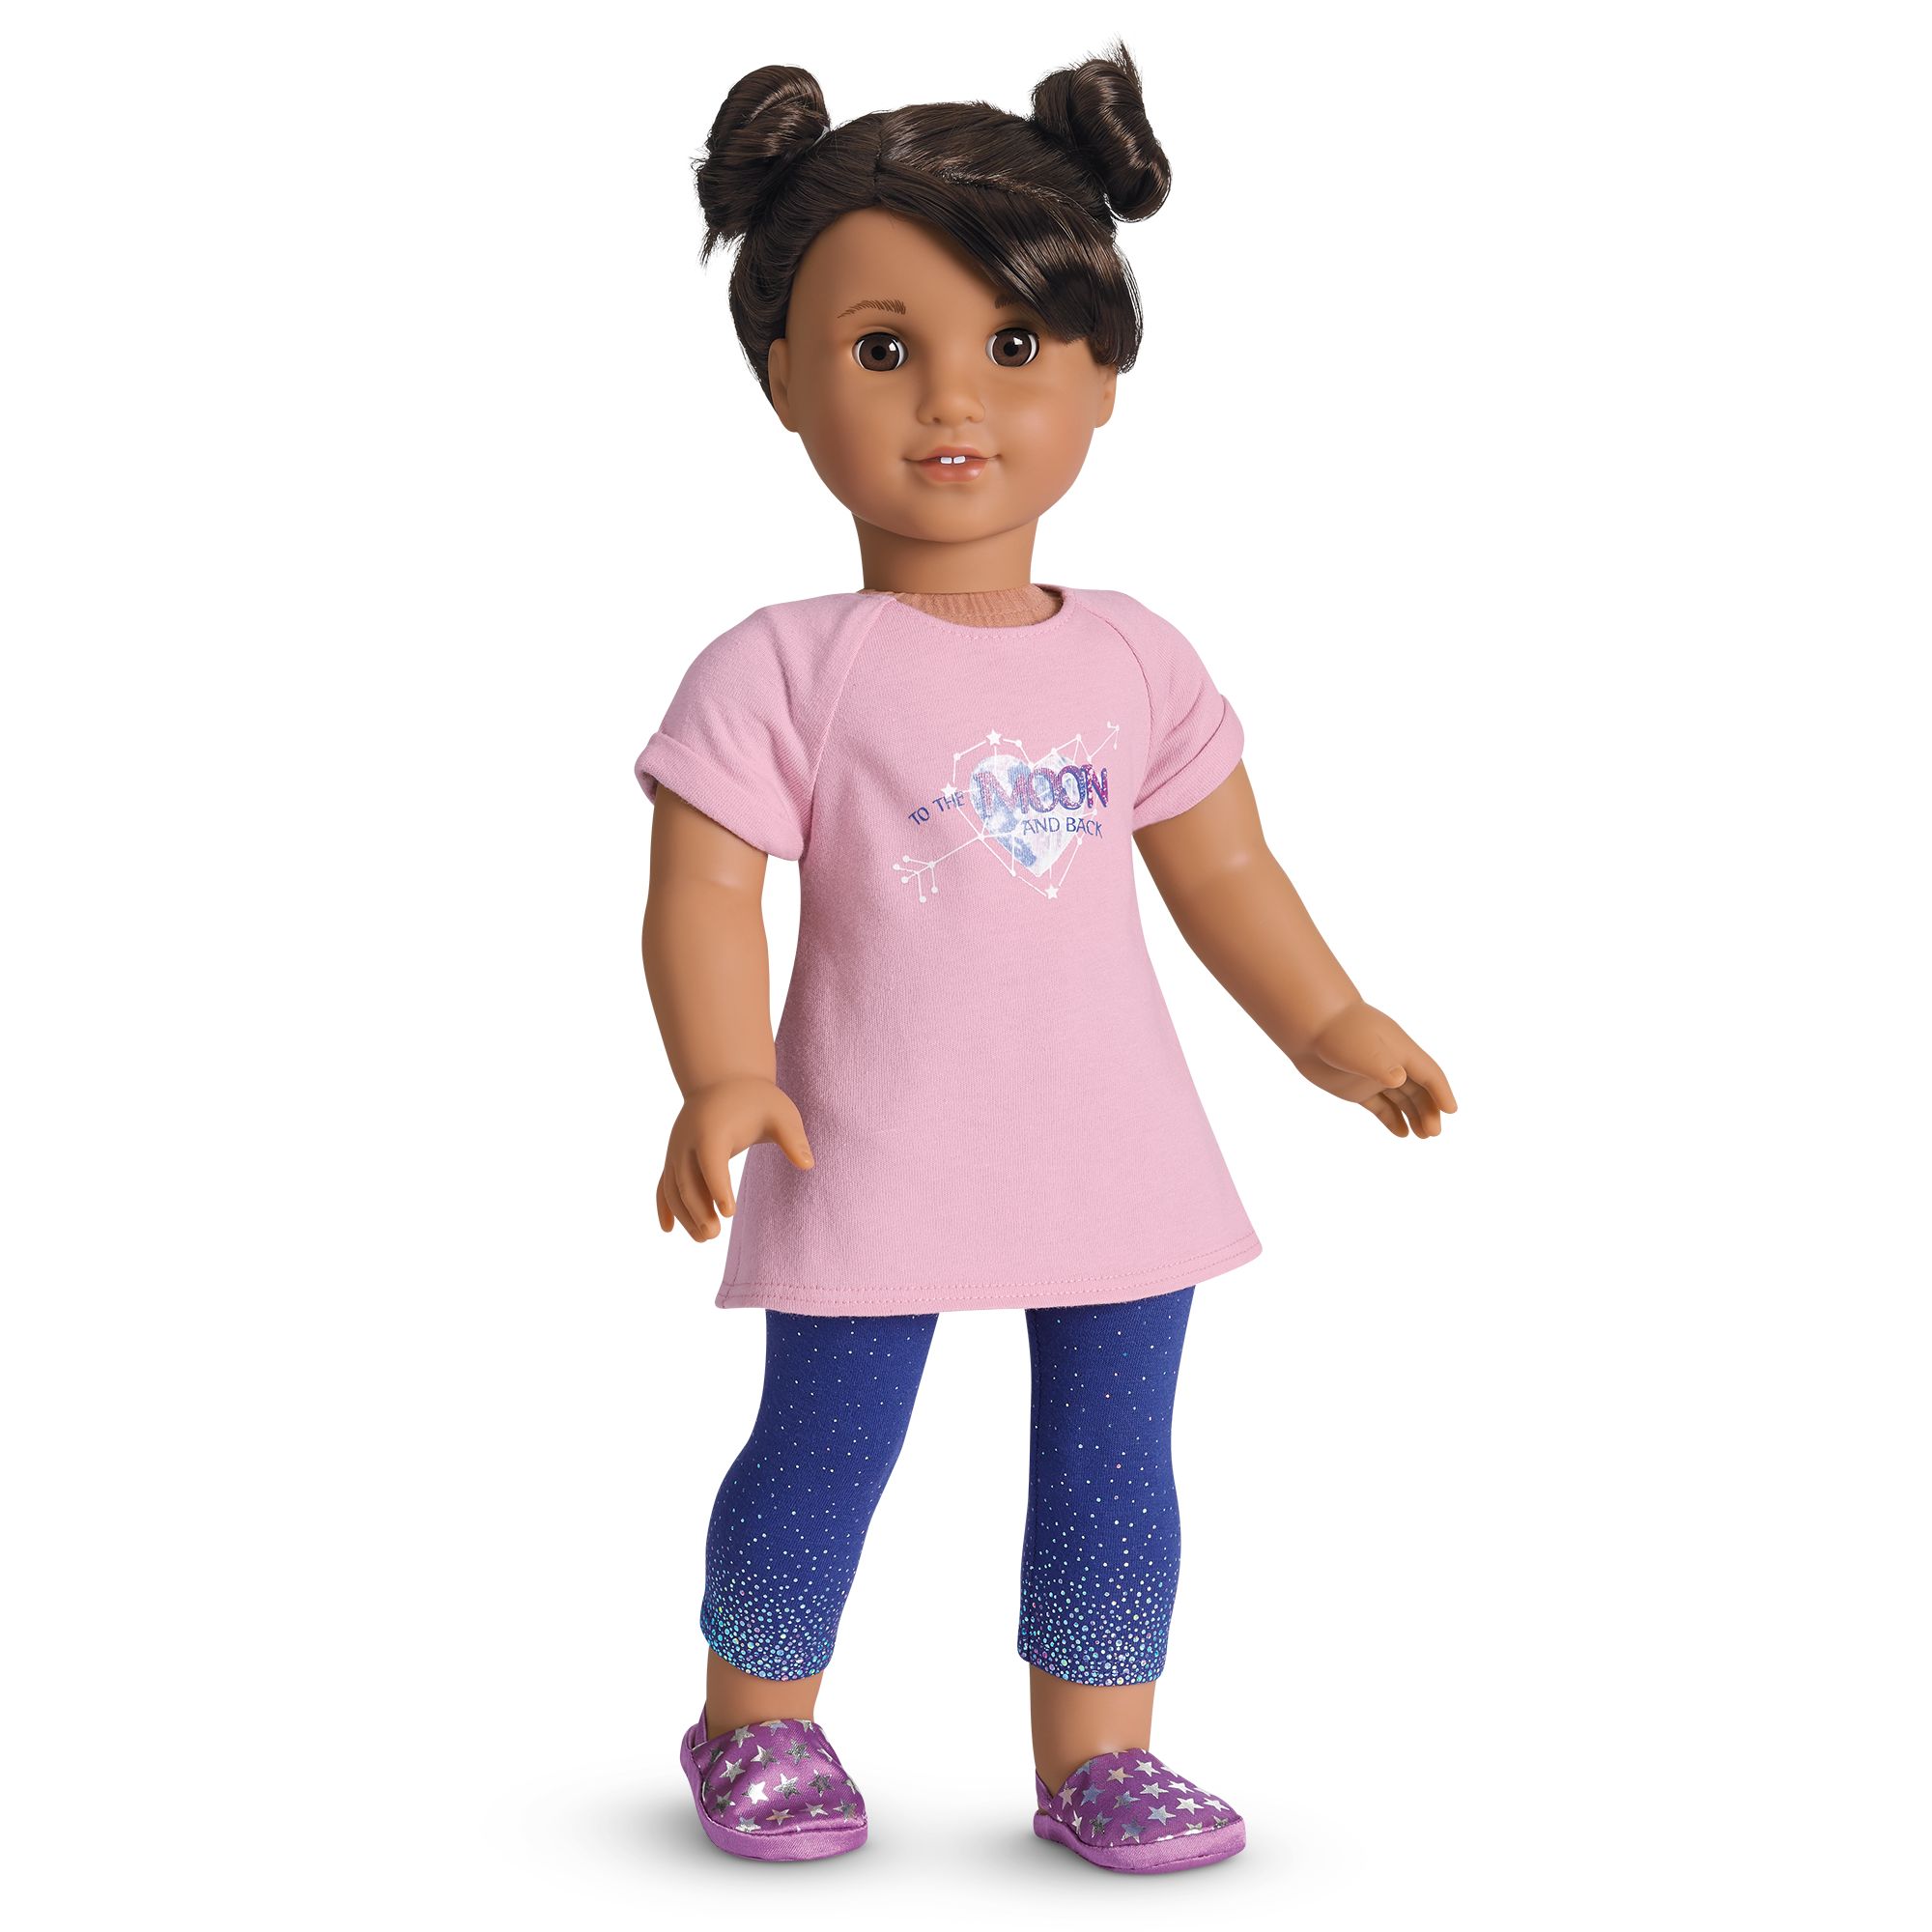 luciana the american girl doll